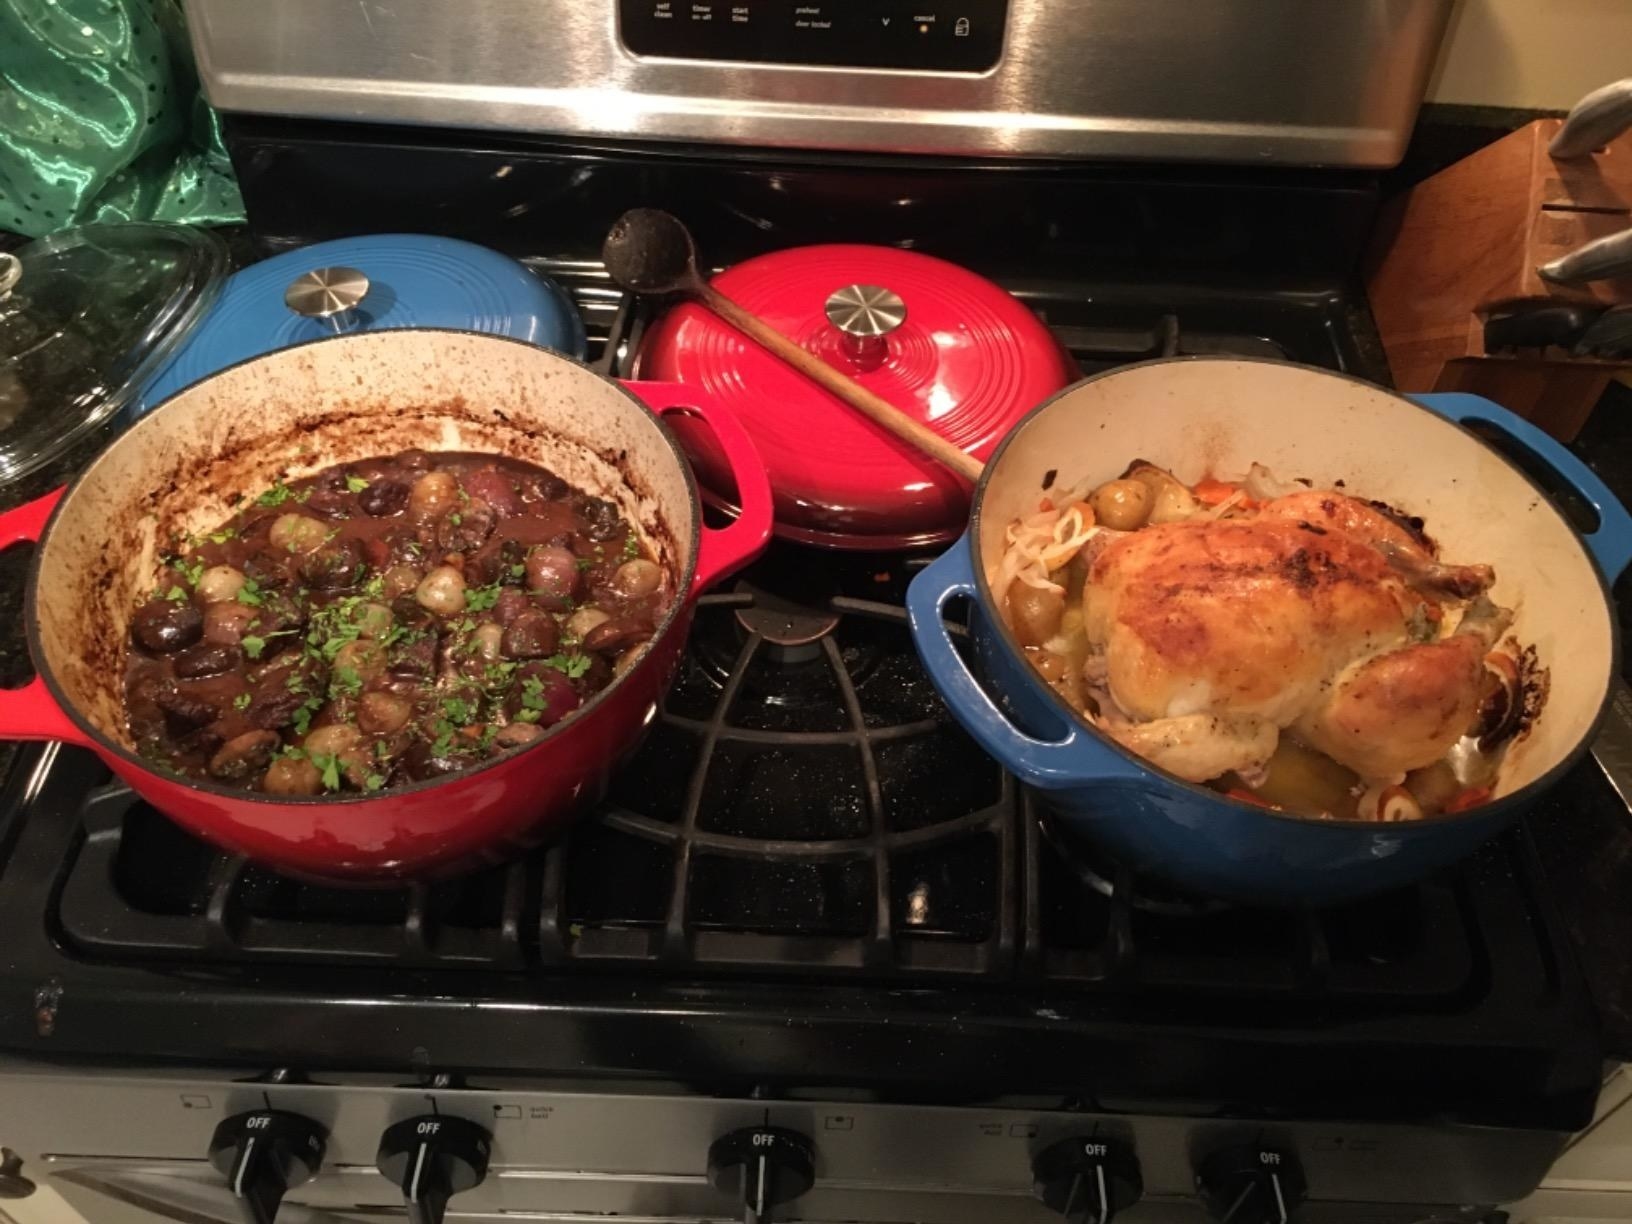 a reviewer photo of the red and blue Dutch ovens on a stove, one has mushrooms and one has a whole roasted chicken